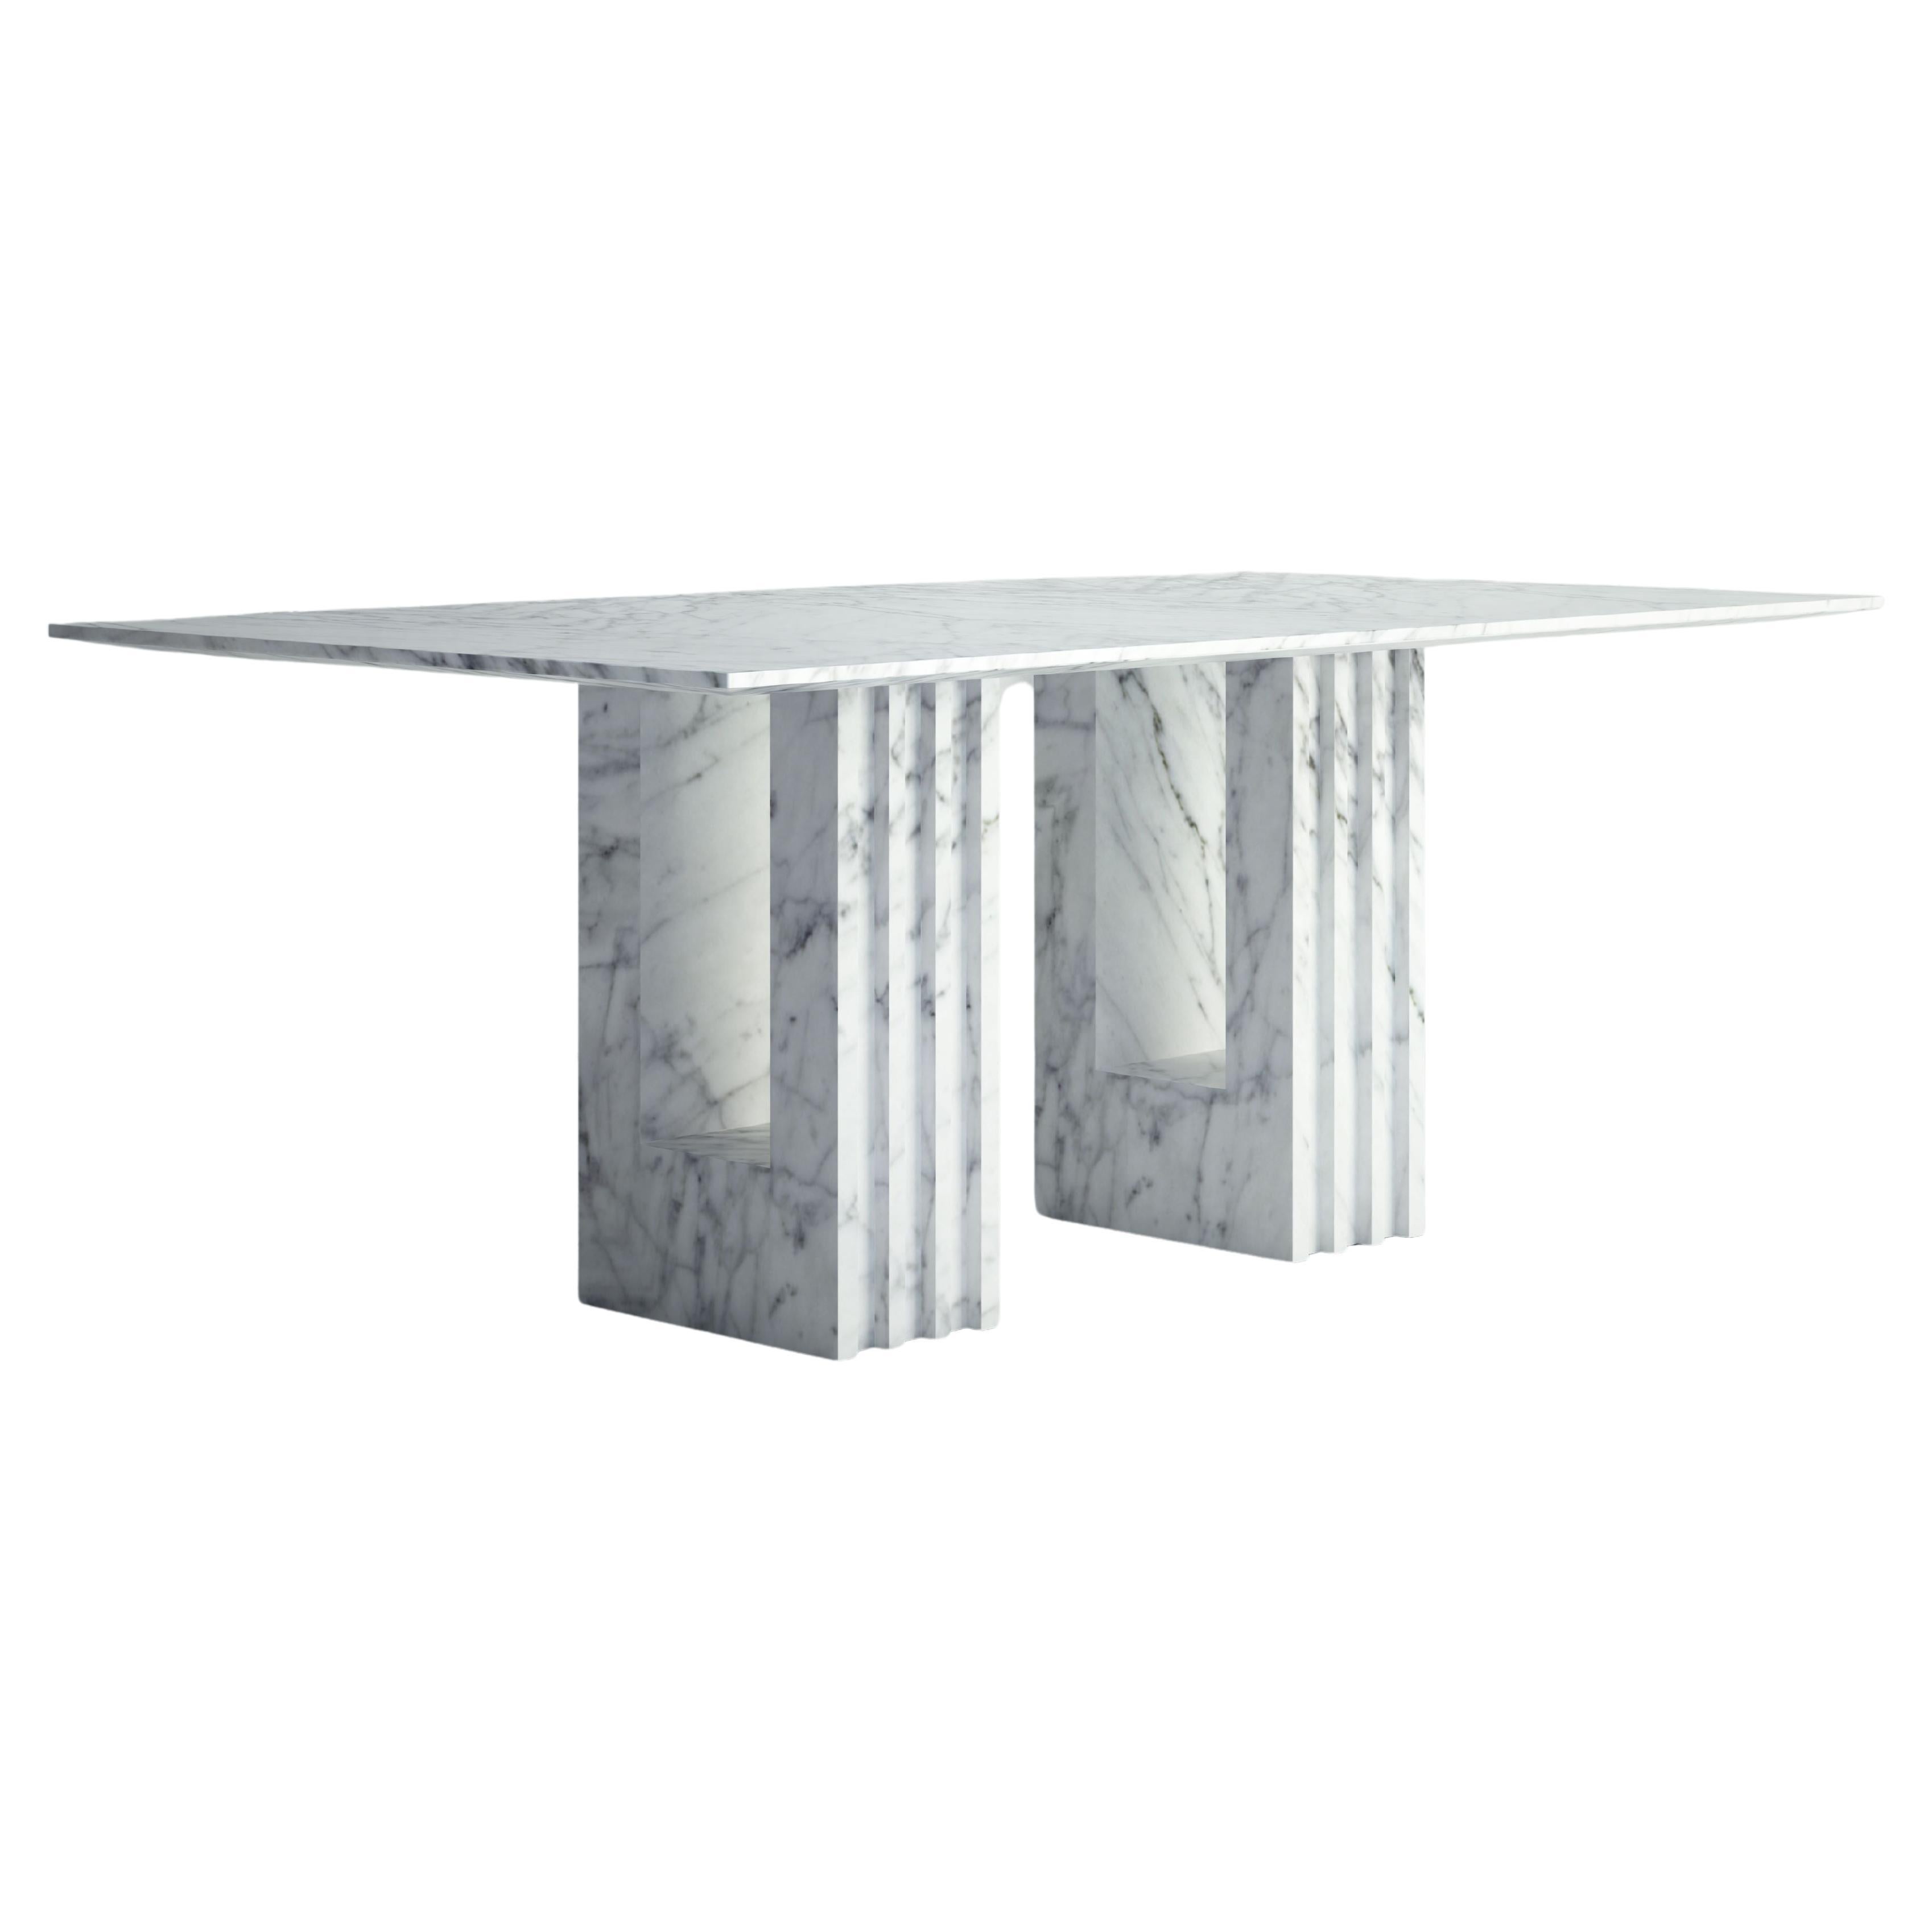 The Madeleine: A Modern Stone Dining Table with a Rectangular Top and Bases